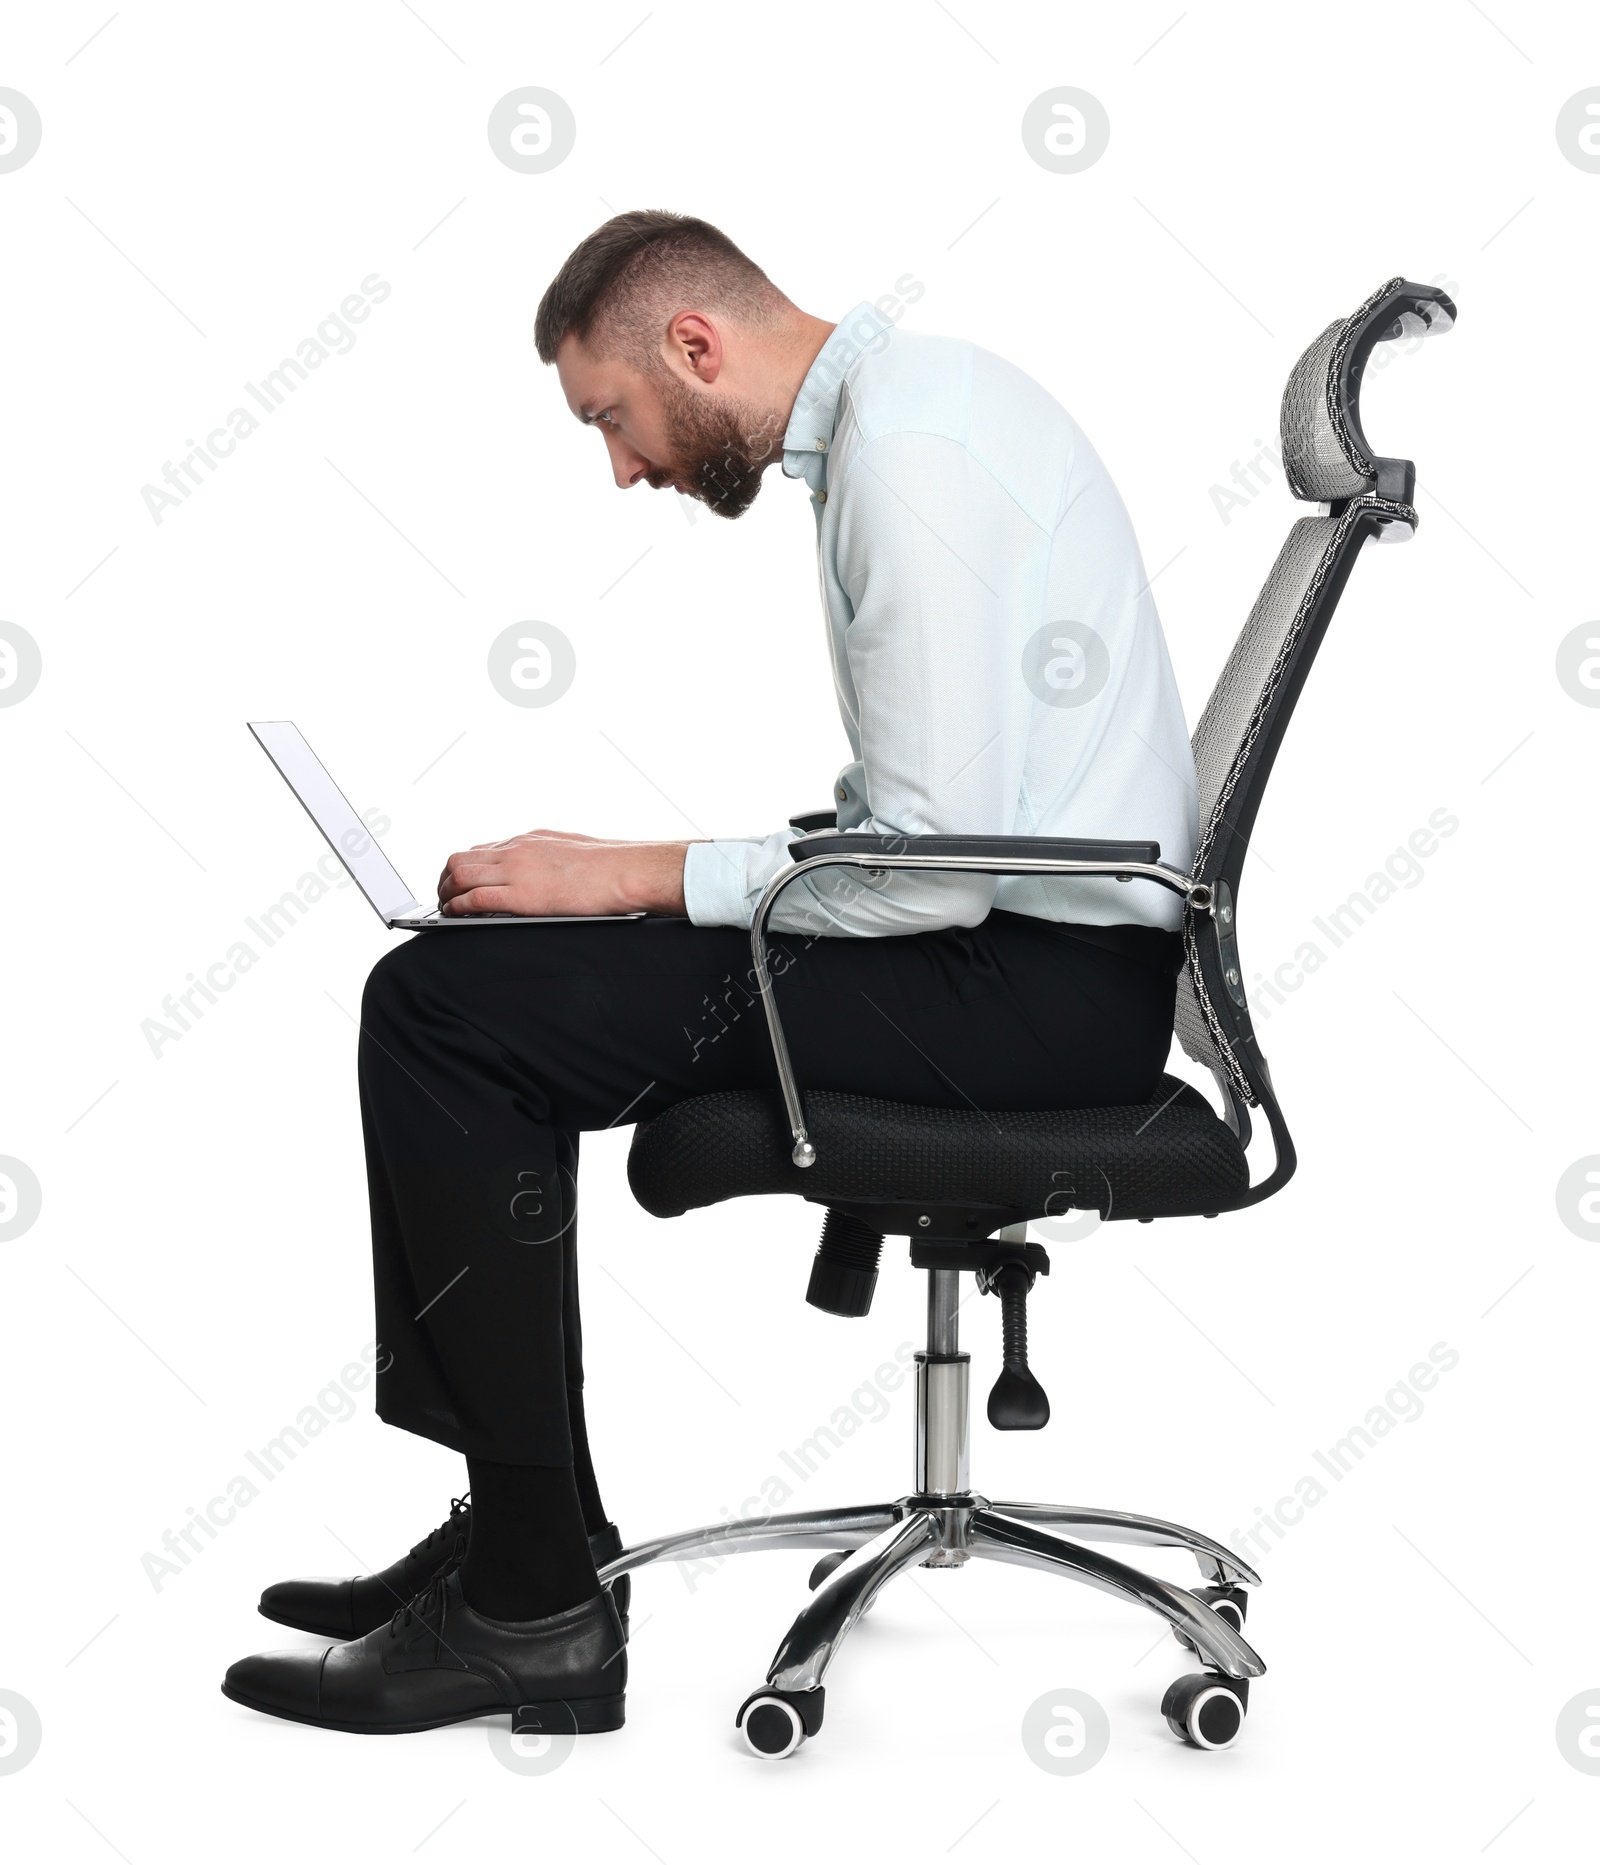 Photo of Man with poor posture sitting on chair and using laptop against white background